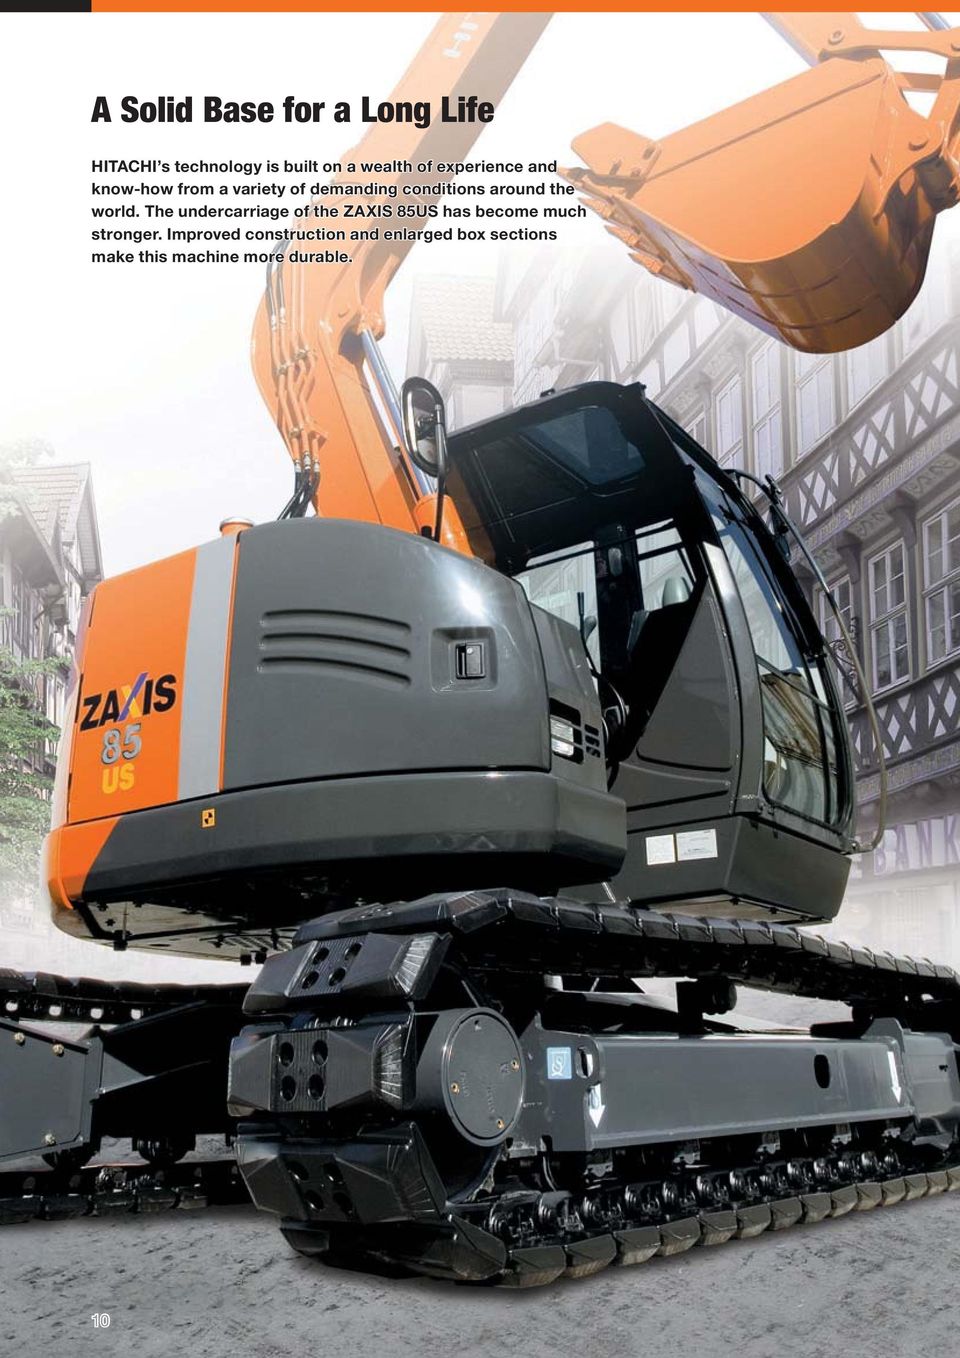 world. The undercarriage of the ZAXIS 85US has become much stronger.